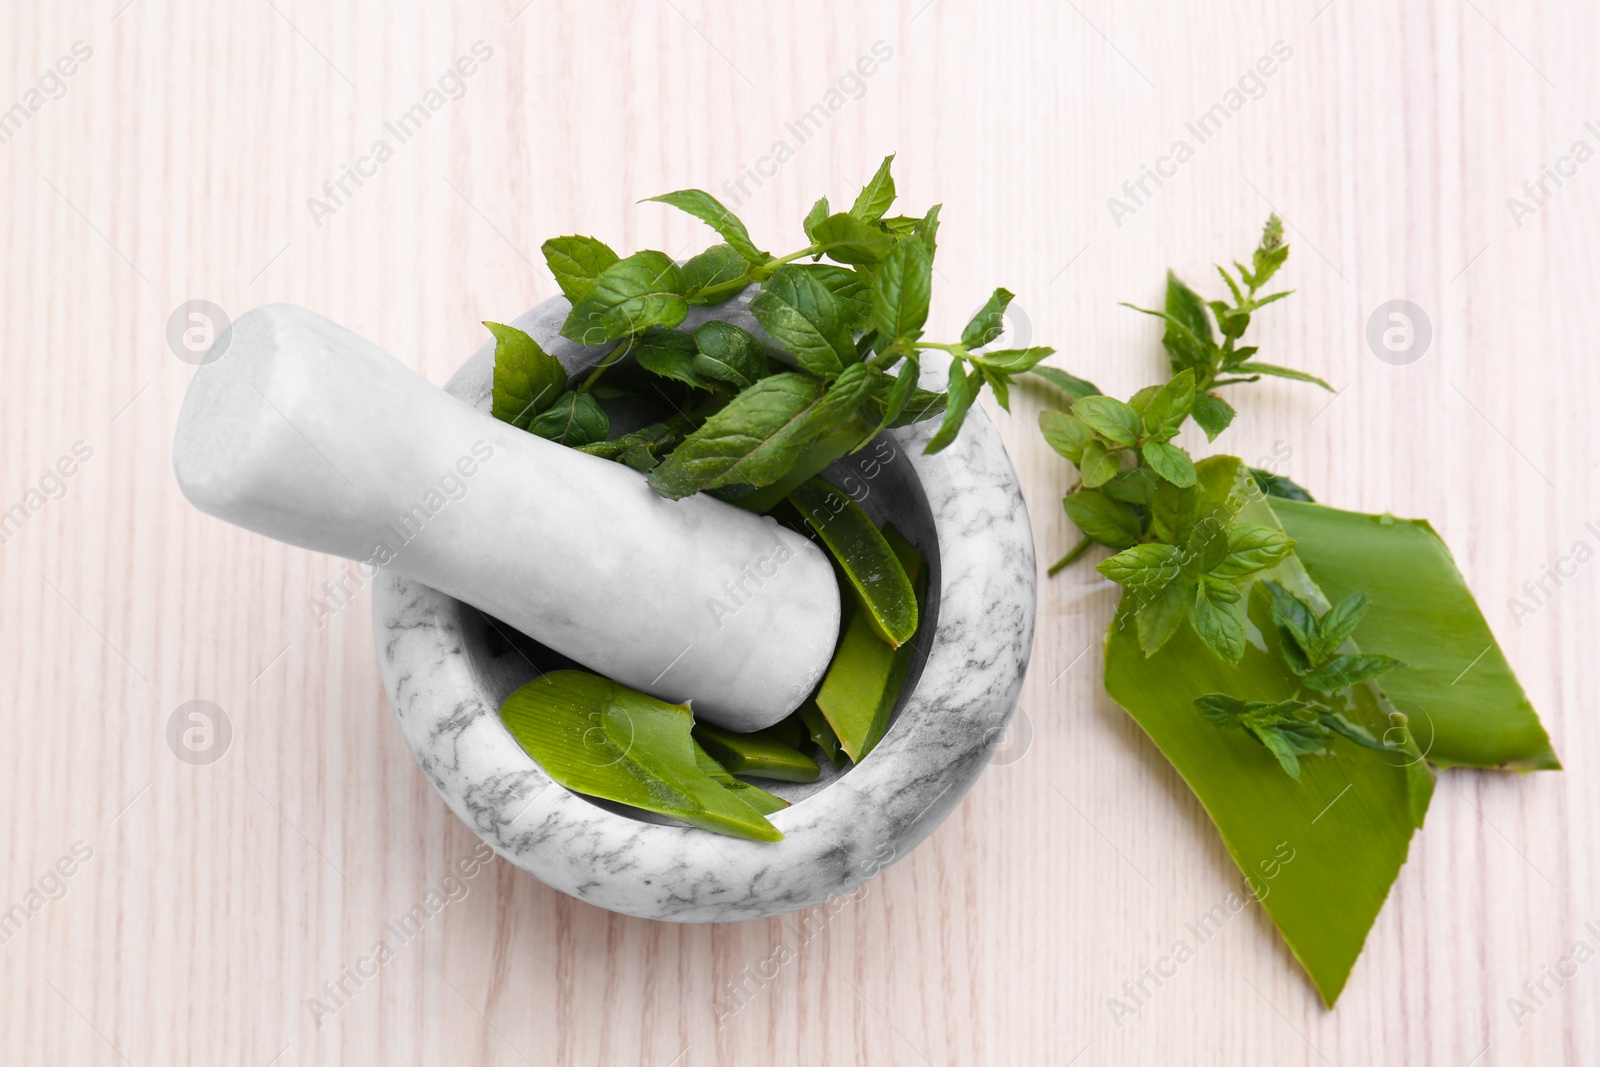 Photo of Mortar with pestle, aloe and mint leaves on wooden table, top view